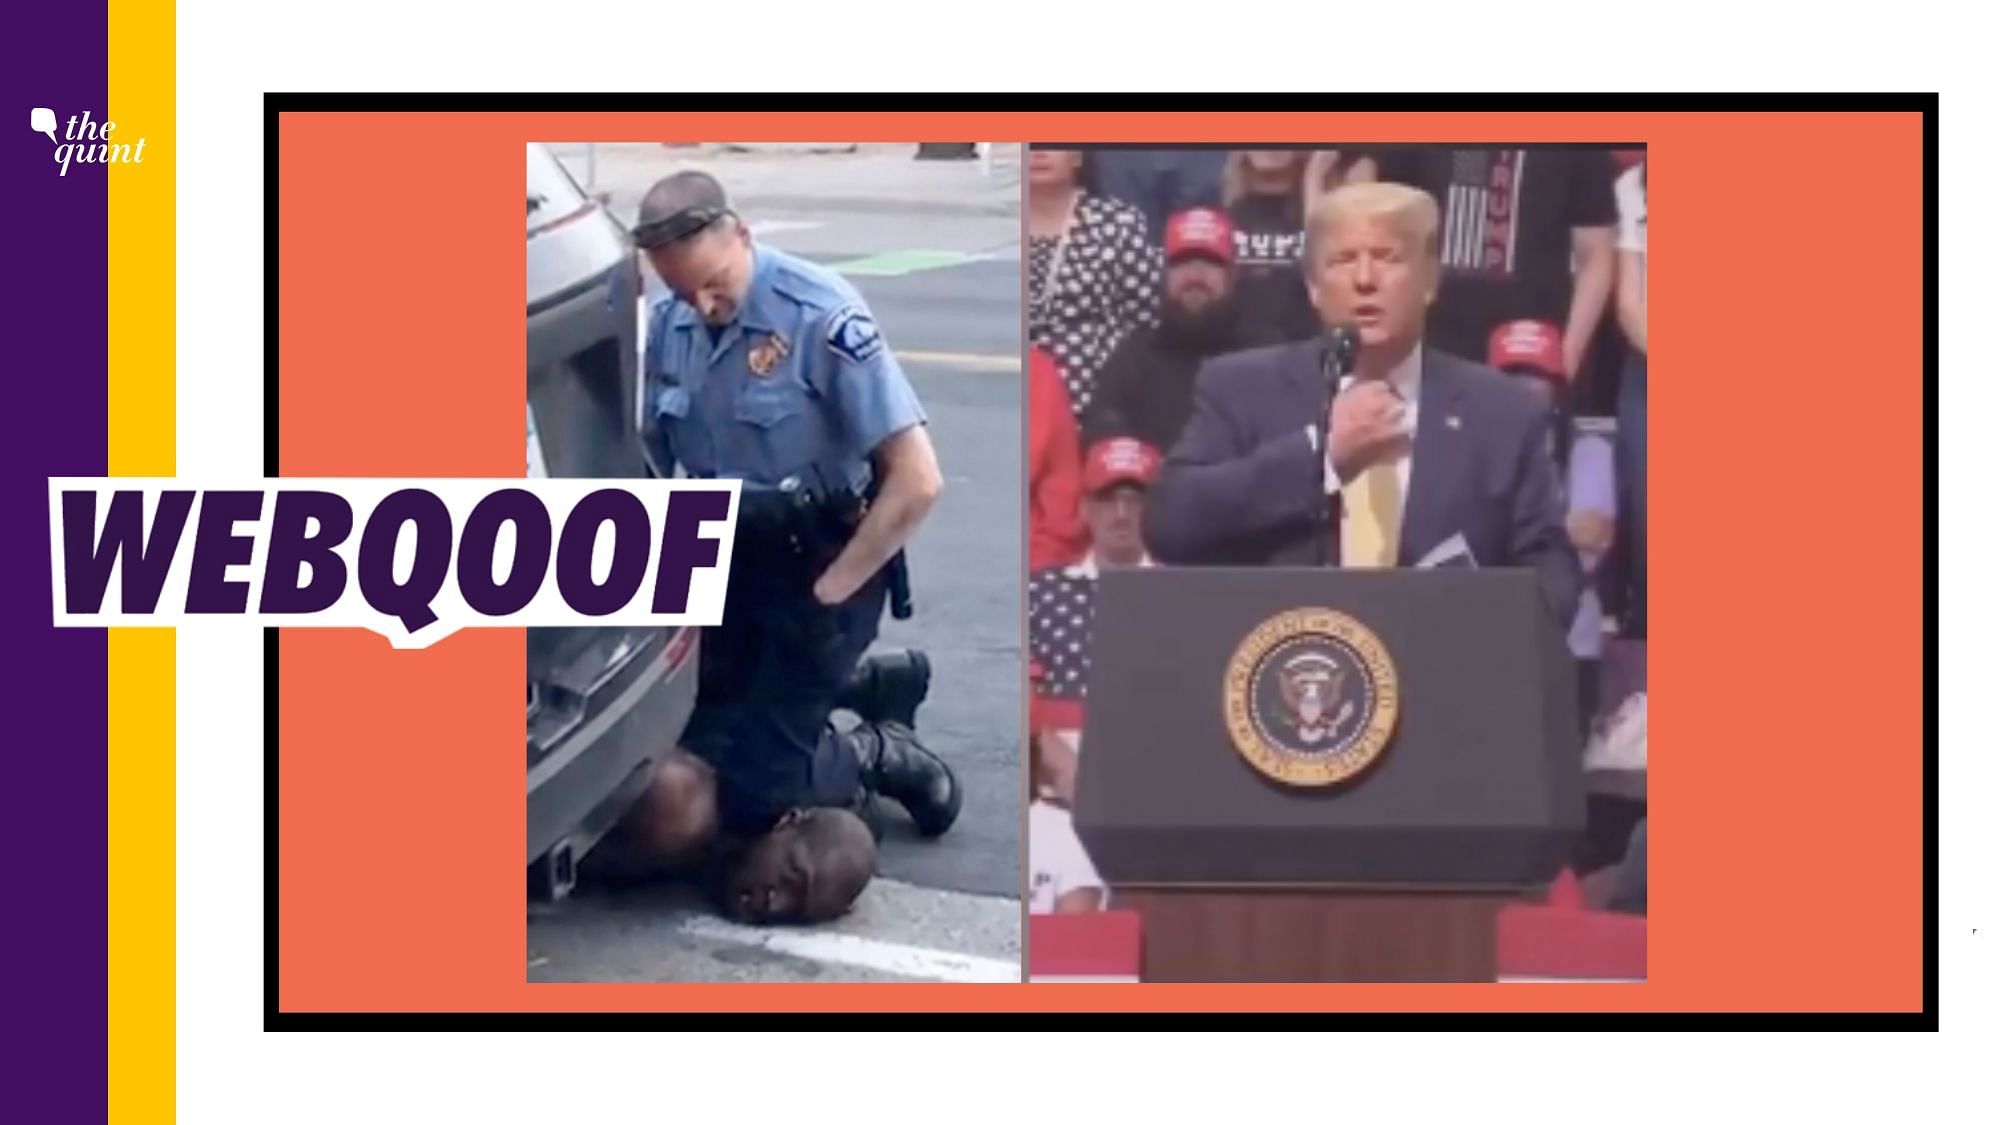 An old video is being shared to falsely claim that US President Donald Trump mocked the death of George Floyd.